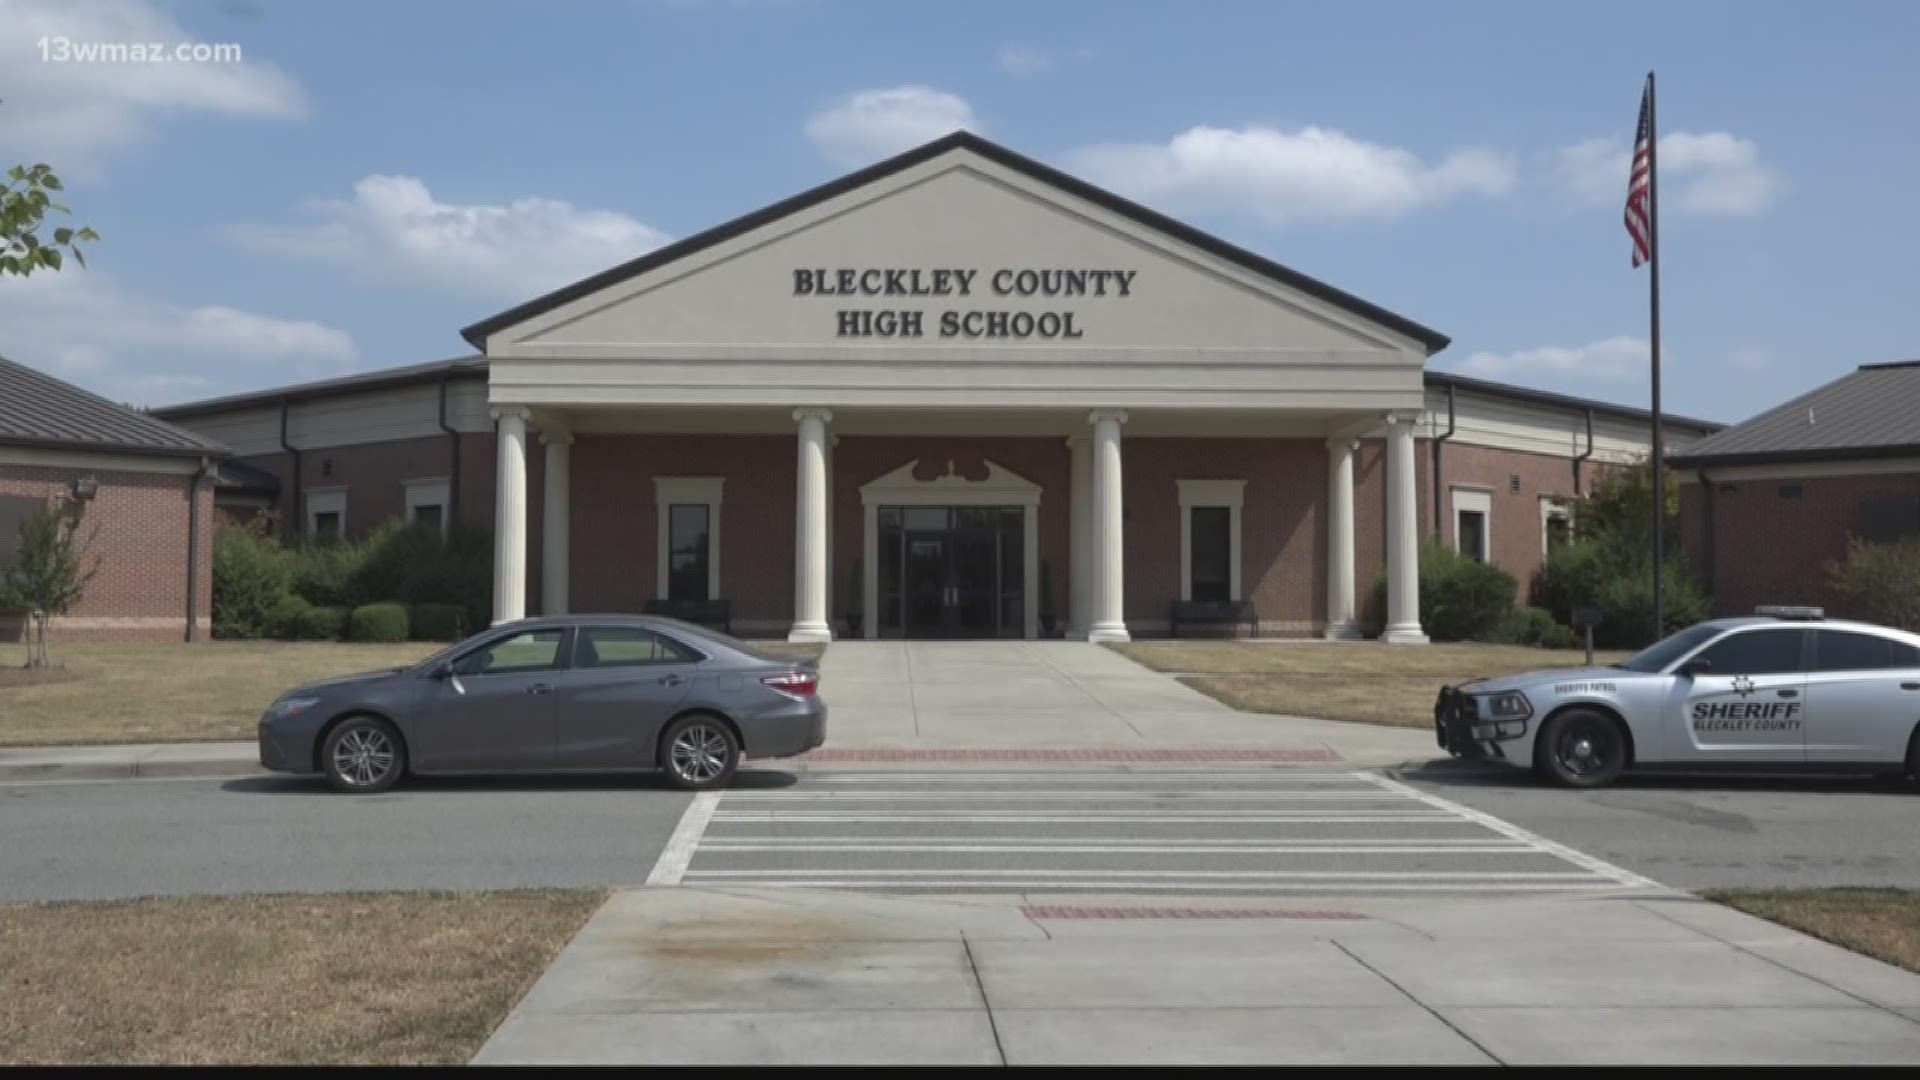 The GBI says it's investigating whether a Bleckley County High School teacher had an inappropriate relationship with a student.